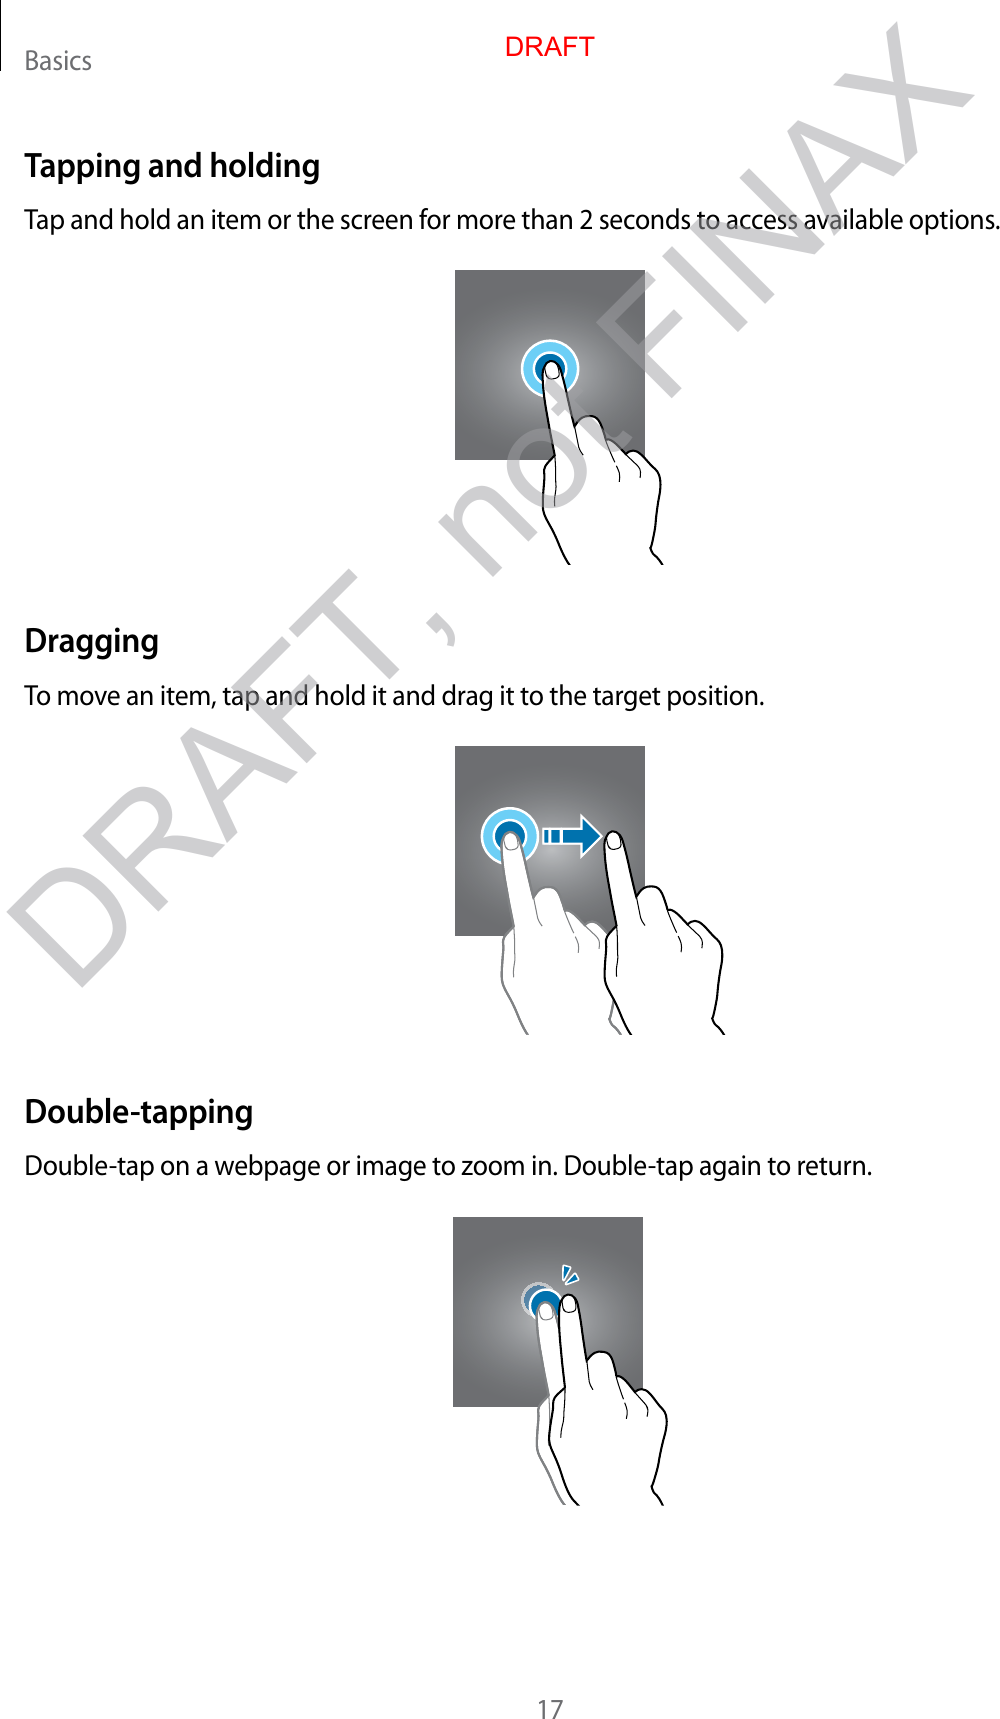 Basics17Tapping and holdingTap and hold an item or the screen for more than 2 seconds to access available options.DraggingTo move an item, tap and hold it and drag it to the target position.Double-tappingDouble-tap on a webpage or image to zoom in. Double-tap again to return.DRAFTDRAFT, not FINAX